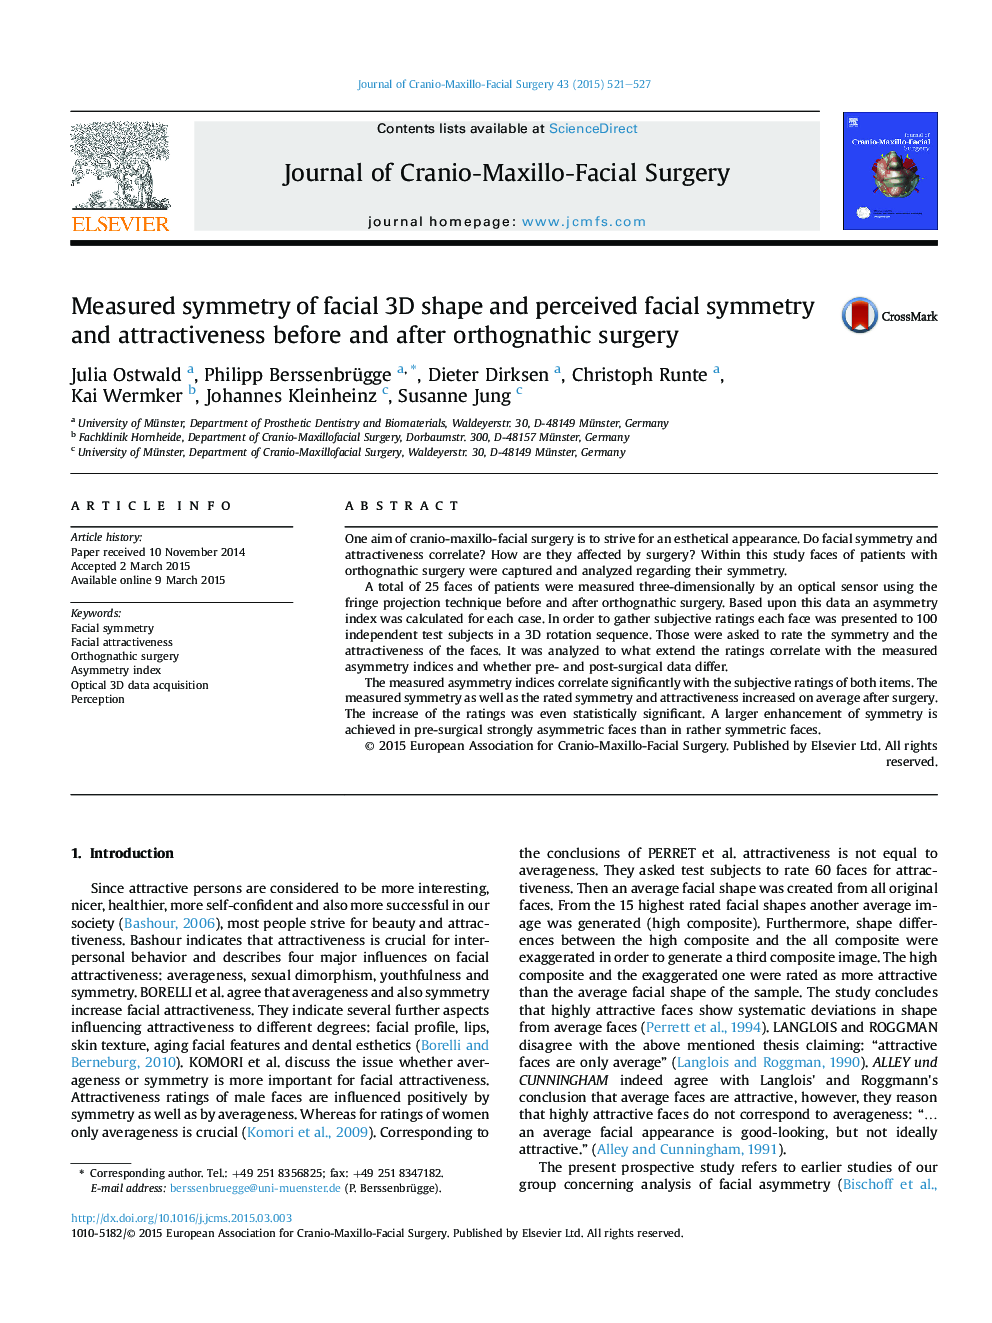 Measured symmetry of facial 3D shape and perceived facial symmetry and attractiveness before and after orthognathic surgery